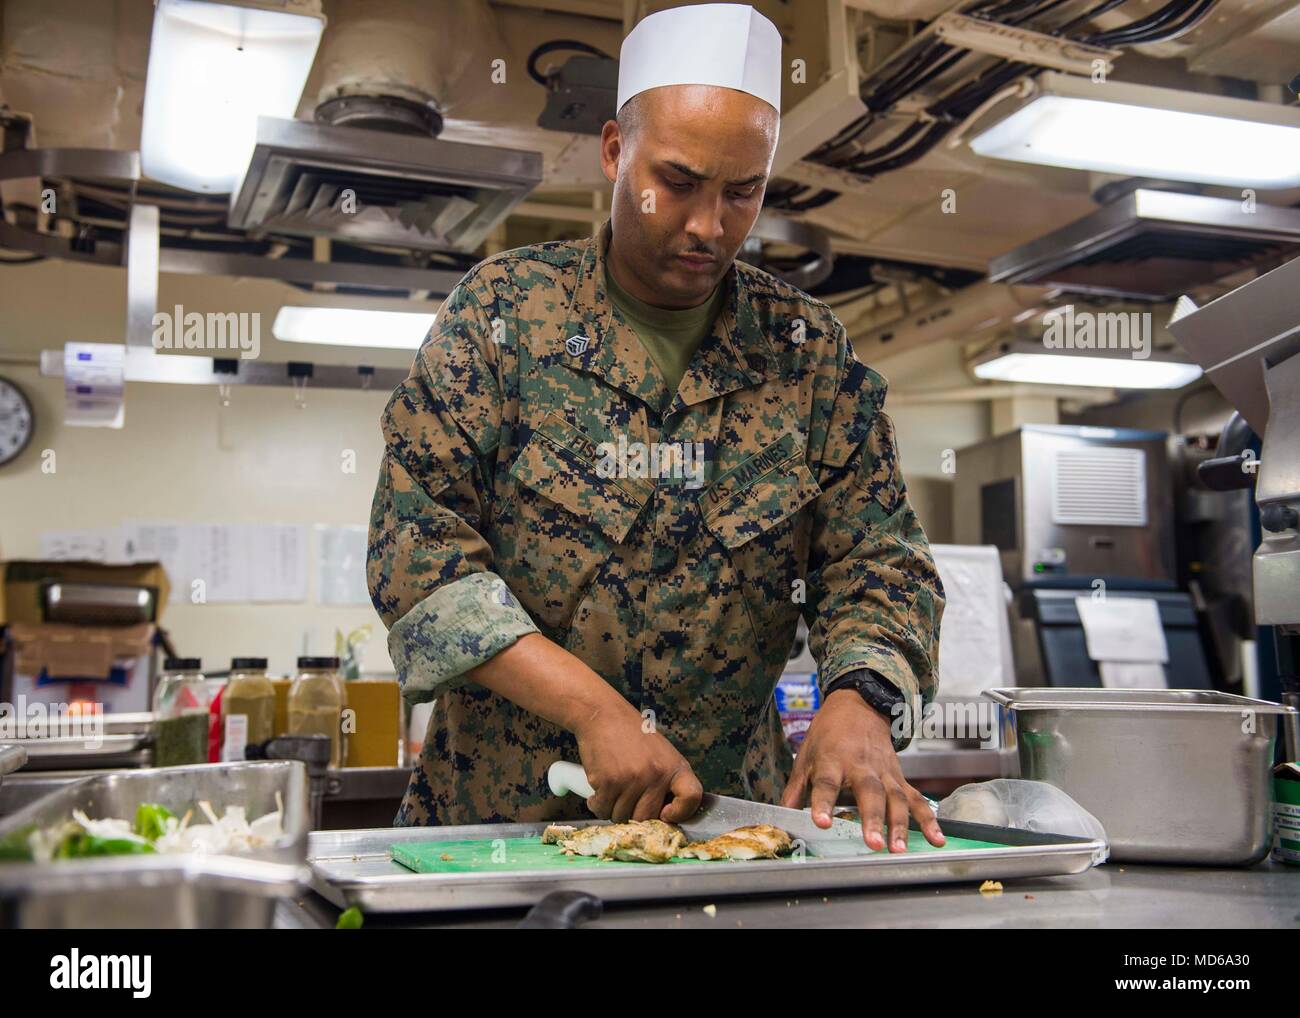 180326-N-XK398-127 PHILIPPINE SEA (March 26, 2018) Staff Sgt. Arthur Fisher, from Manhattan, N.Y., dices up chicken for a meat and vegetable soup for dinner aboard the amphibious dock landing ship USS Ashland (LSD 48). Ashland, part of the Wasp Expeditionary Strike Group (ESG), with embarked 31st MEU, is operating in the Indo-Pacific region to enhance interoperability with partners, serve as a ready-response force for any type of contingency, and advance the Up-Gunned ESG concept. (U.S. Navy photo by Mass Communication Specialist 3rd Class Joshua Mortensen/Released) Stock Photo